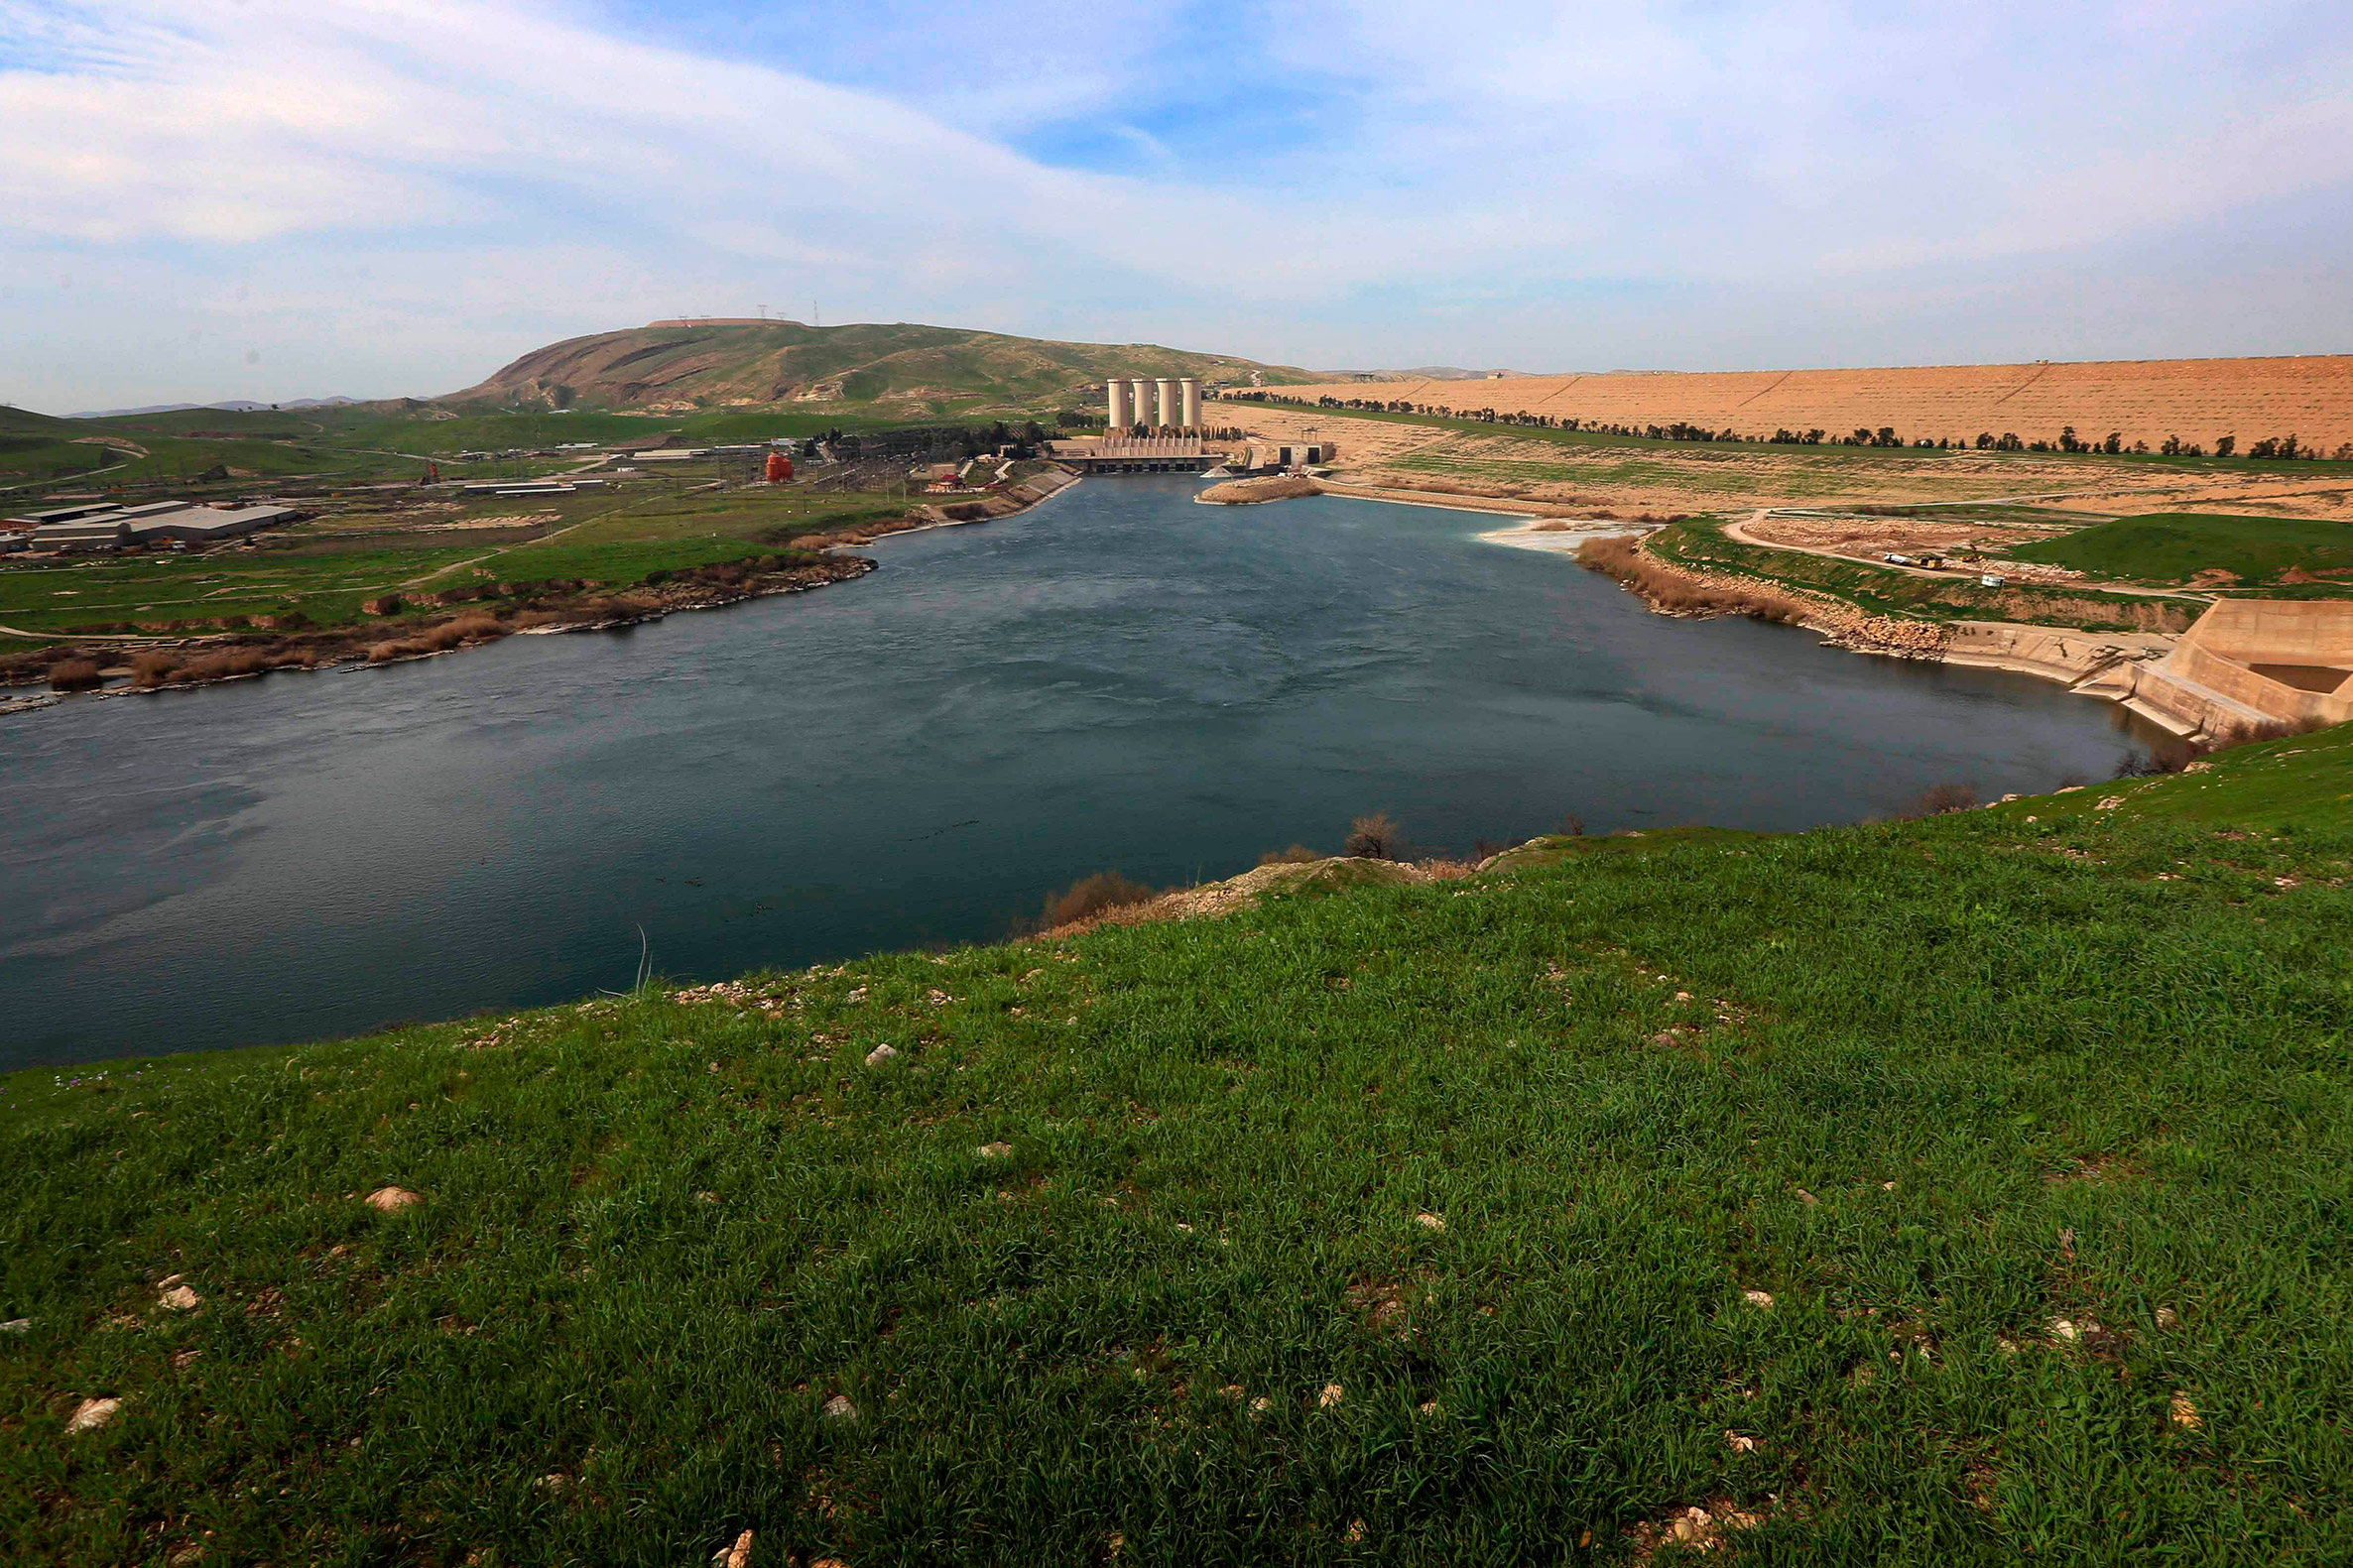 A sweeping view of the Mosul Dam on the Tigris River, about 50km north of Mosul, Iraq, March 3, 2016. (Safin Hamed—AFP/Getty Images)